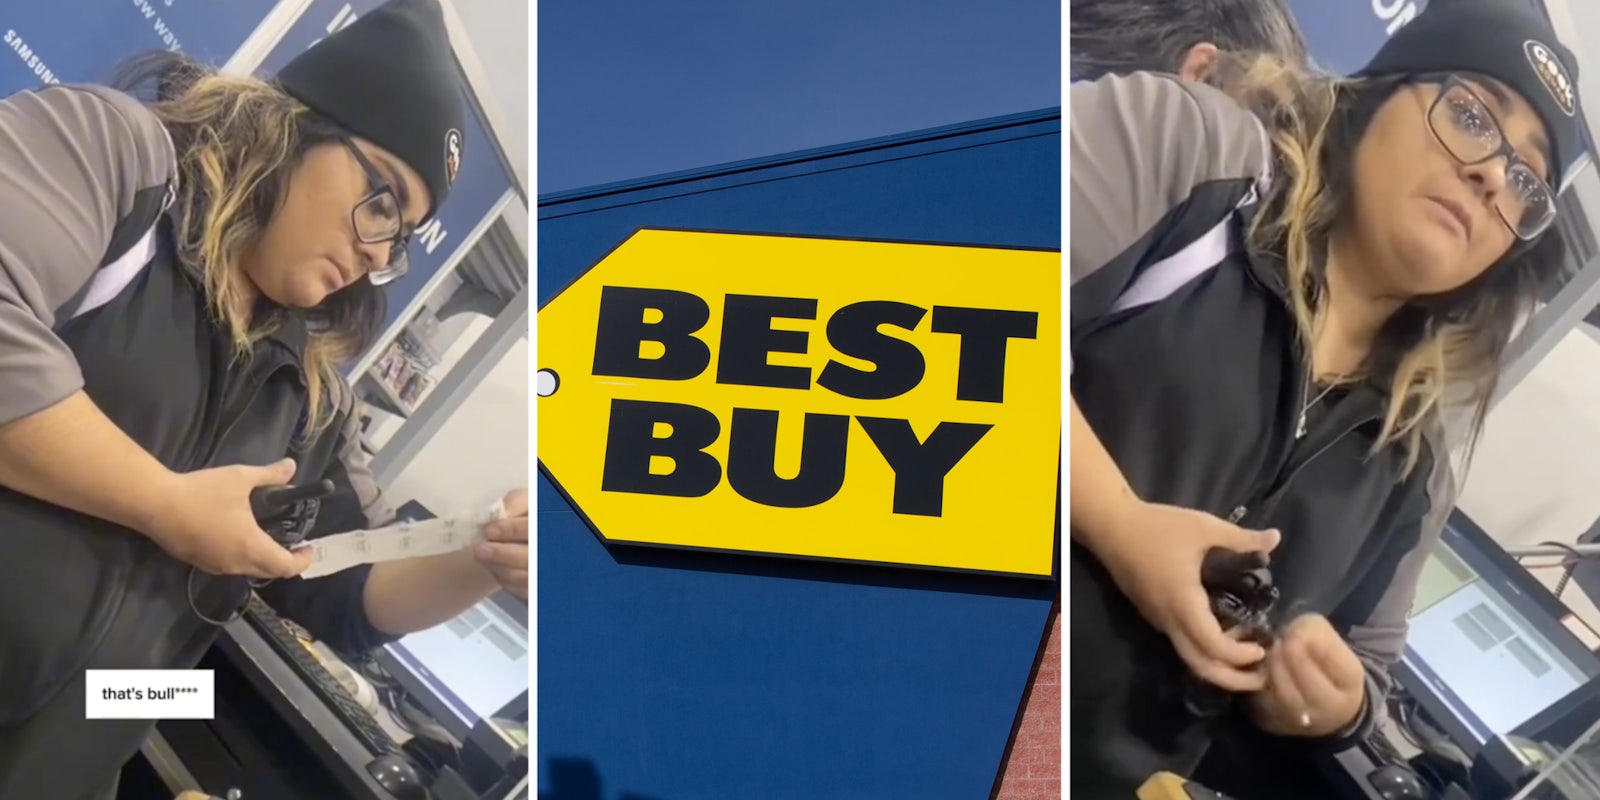 Cashier looking at receipt(l), Best Buy store(c), Cashier looking scared(r)